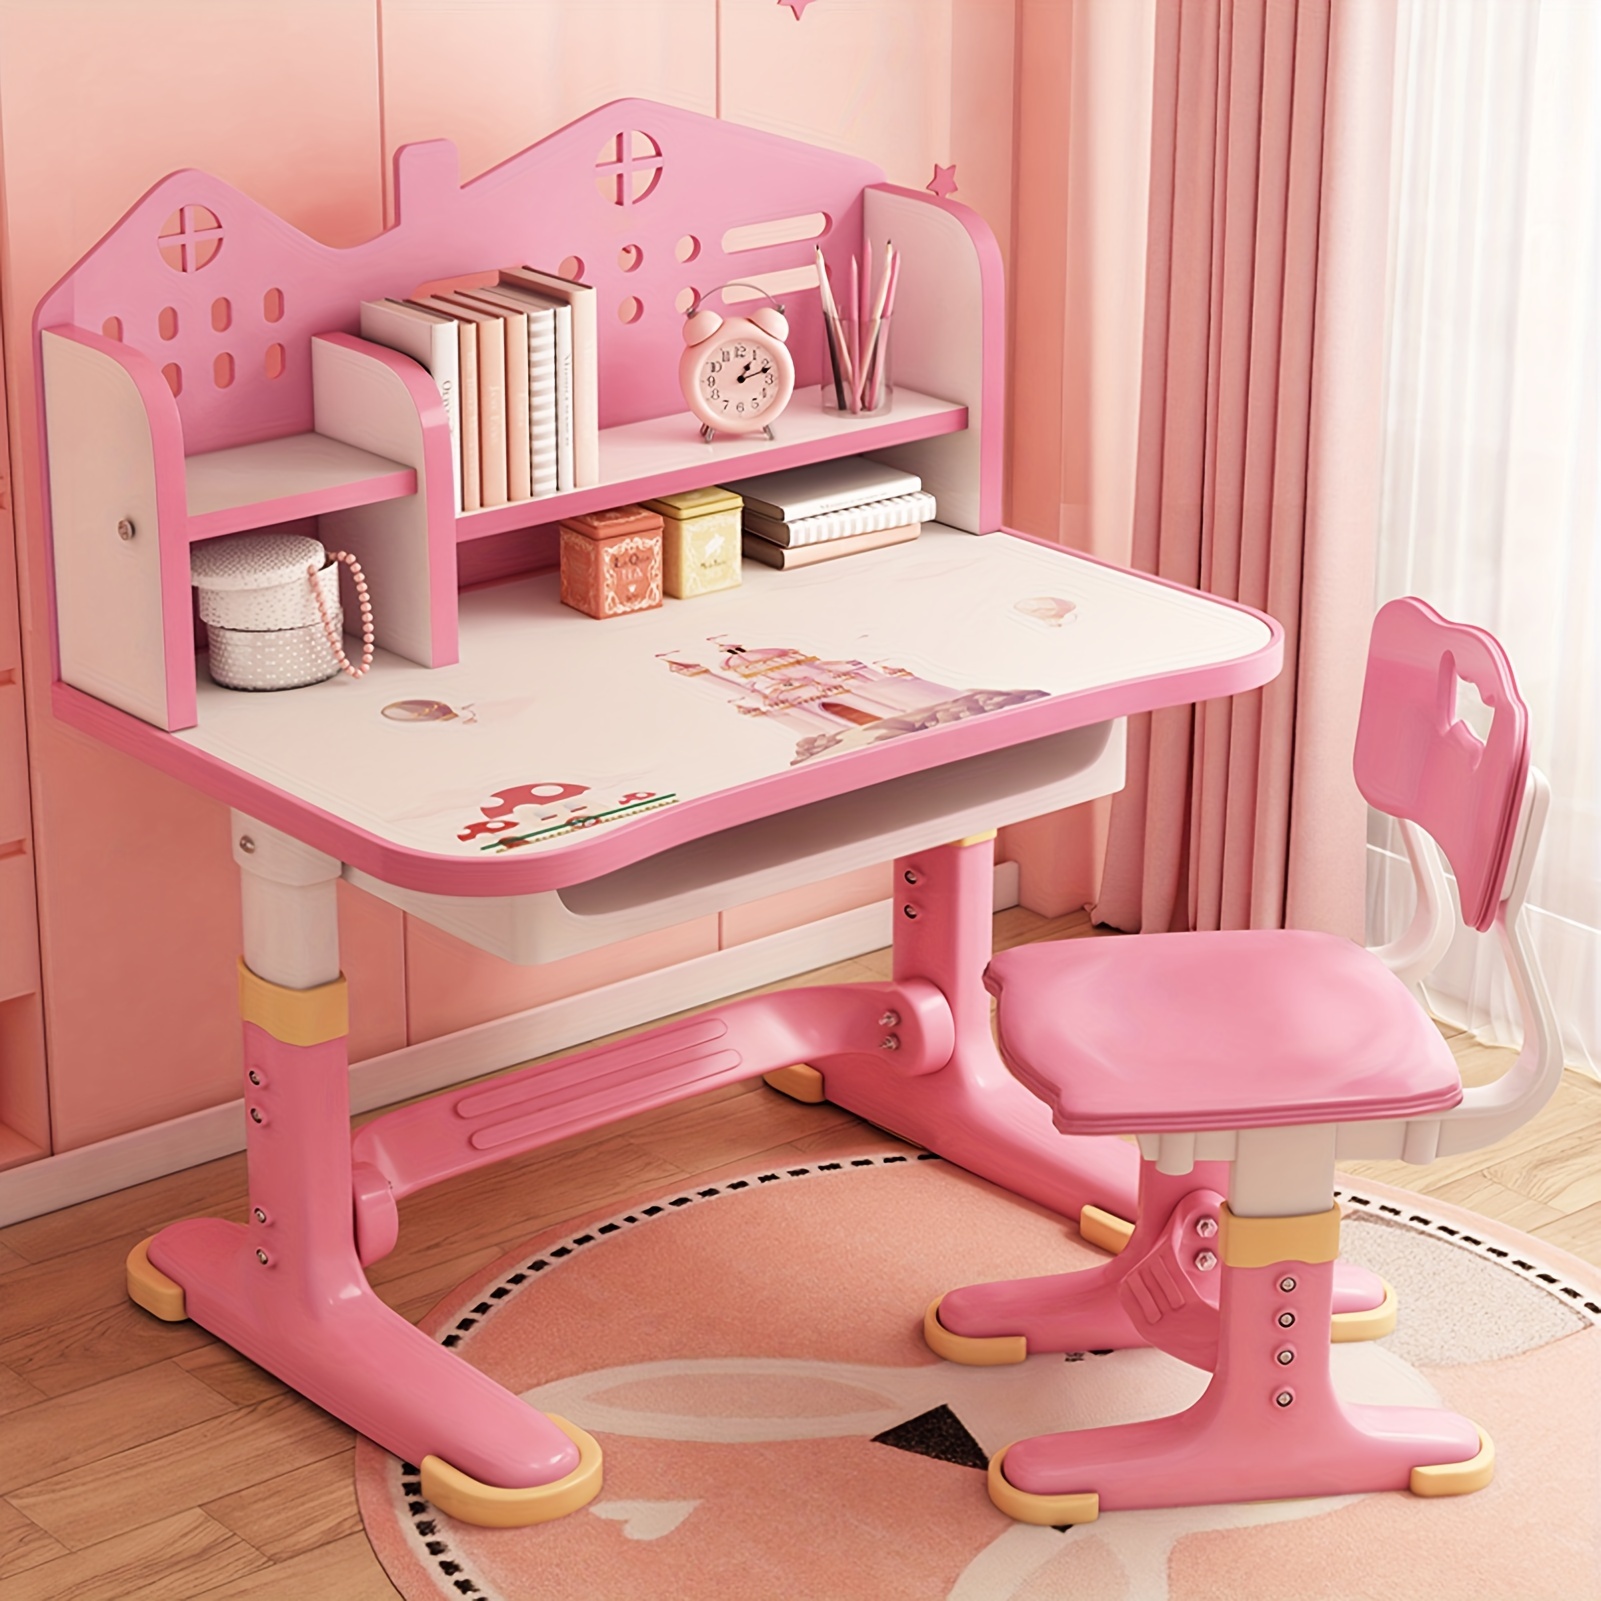 

A 41.37*29.75*24.63 Inches Children's Functional Desk And Chair Set, Height Adjustable Children's School Study Table With Castle Back, Wider Desktop, Bookshelf And Storage Drawer (pink)